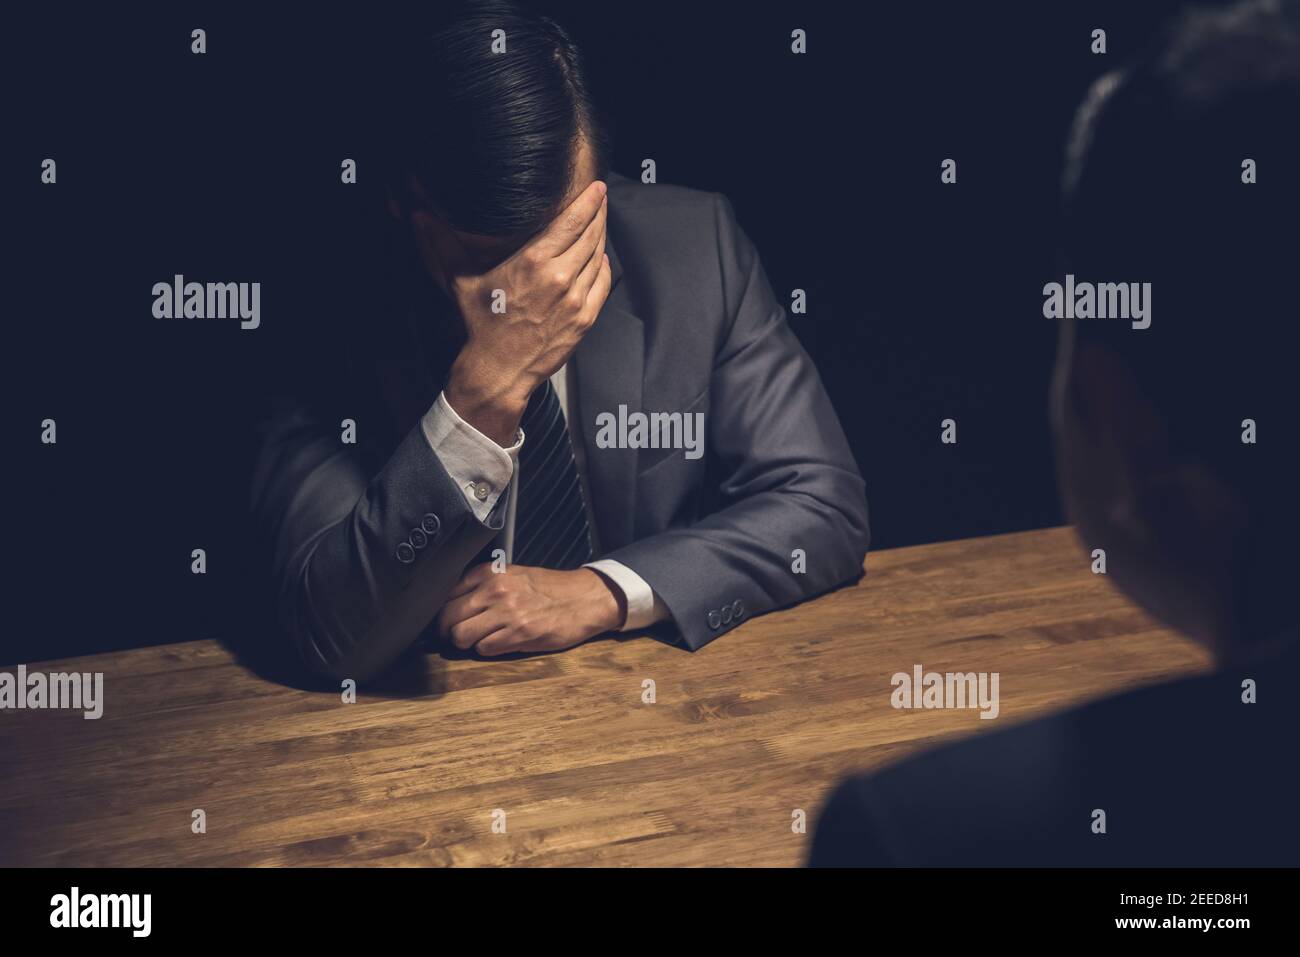 Suspect businessman displaying regret, worry and concern using body language in dark interrogation room Stock Photo